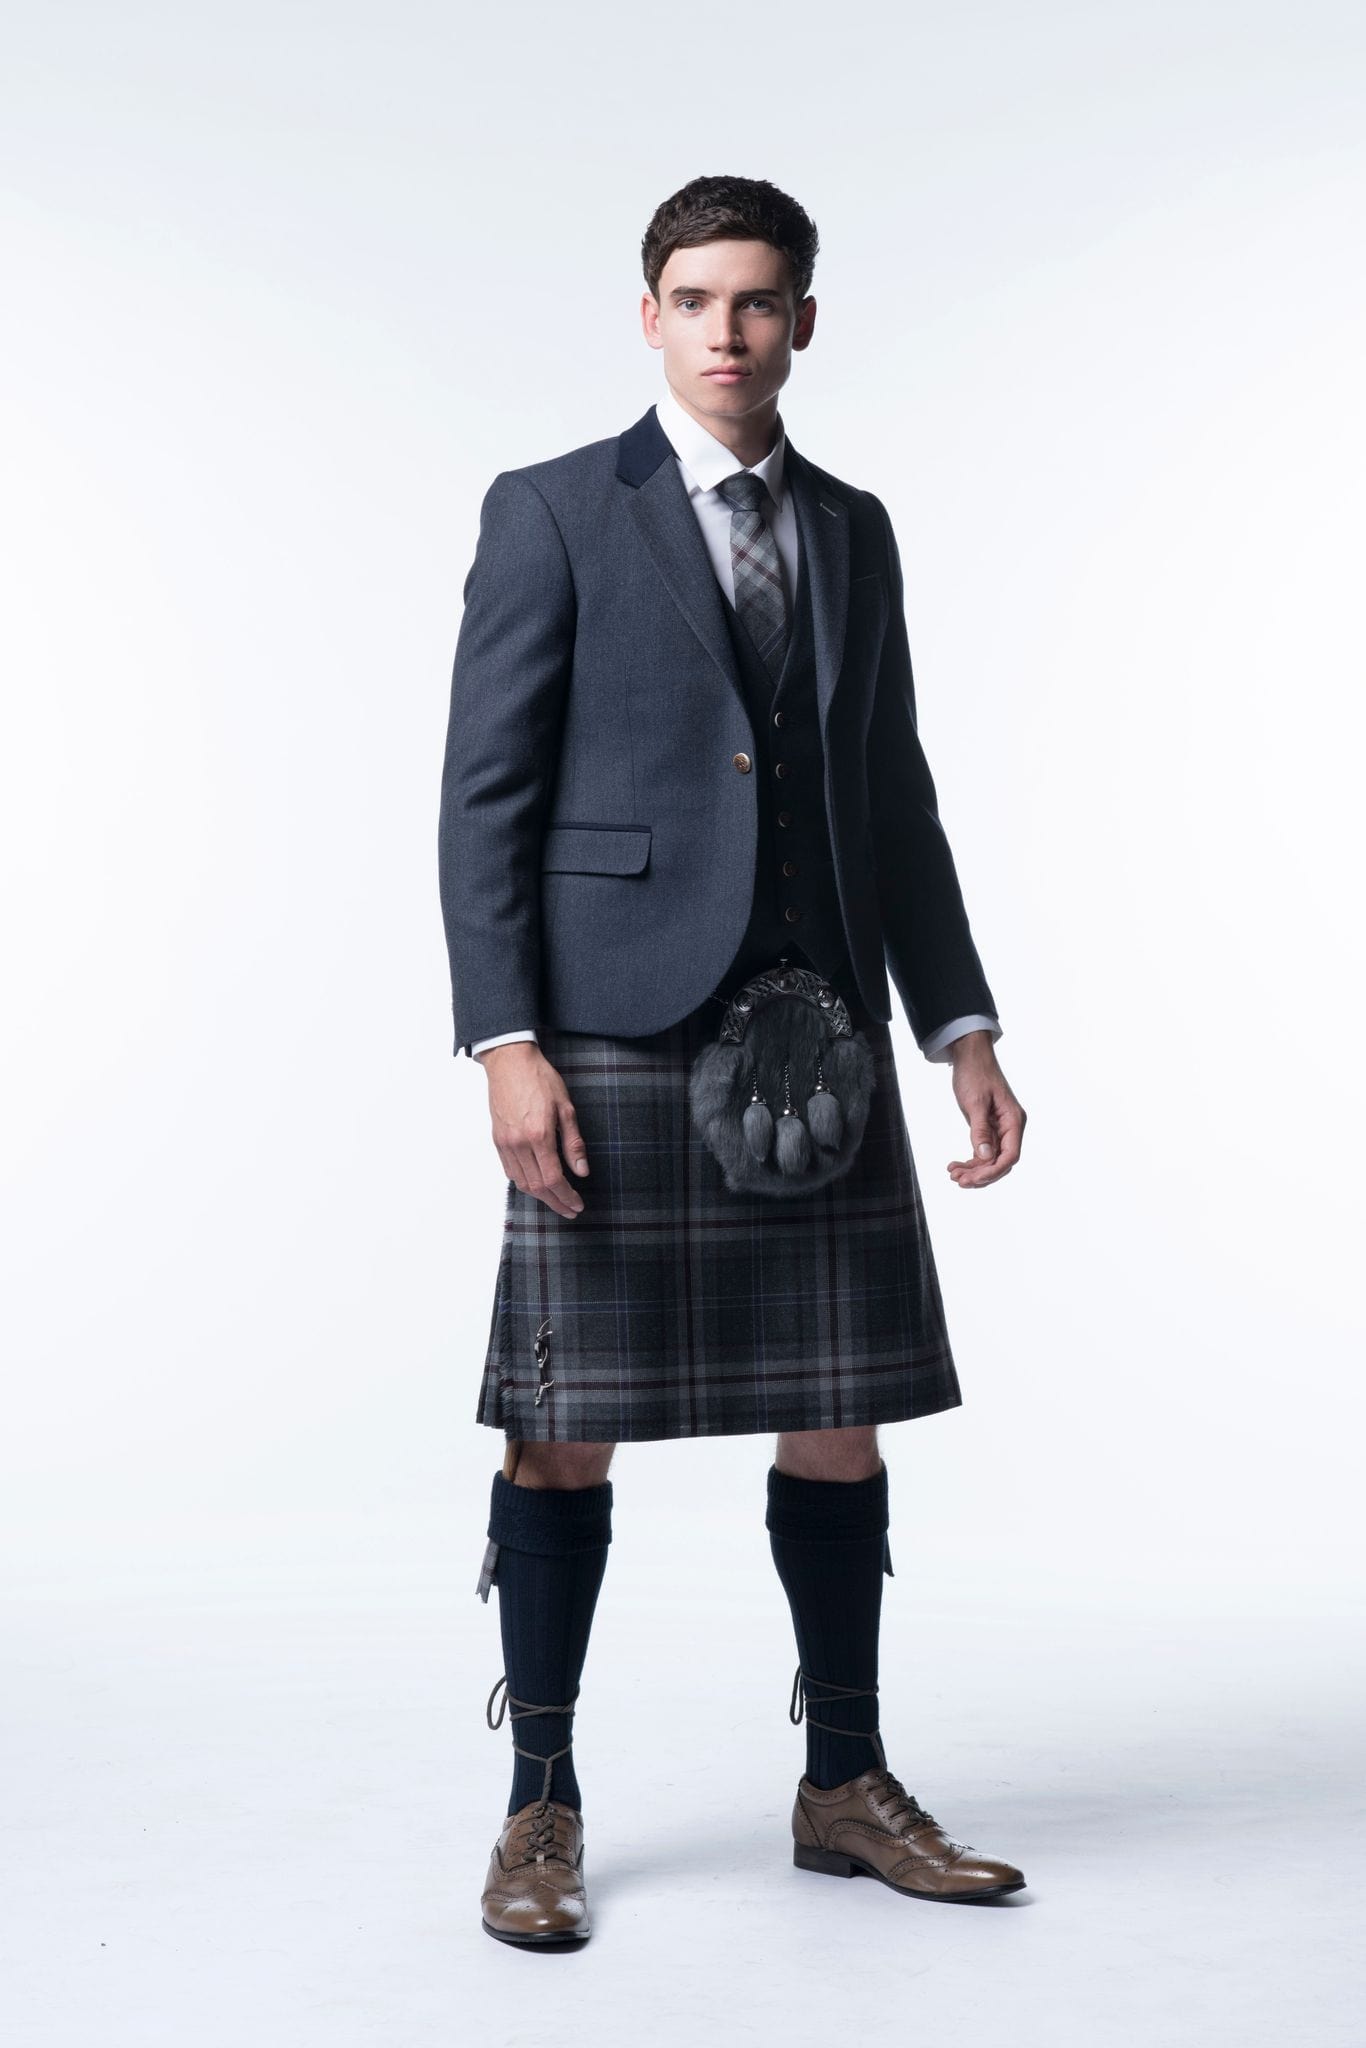 Signature Collection Kilt Outfit - MacGregor and MacDuff